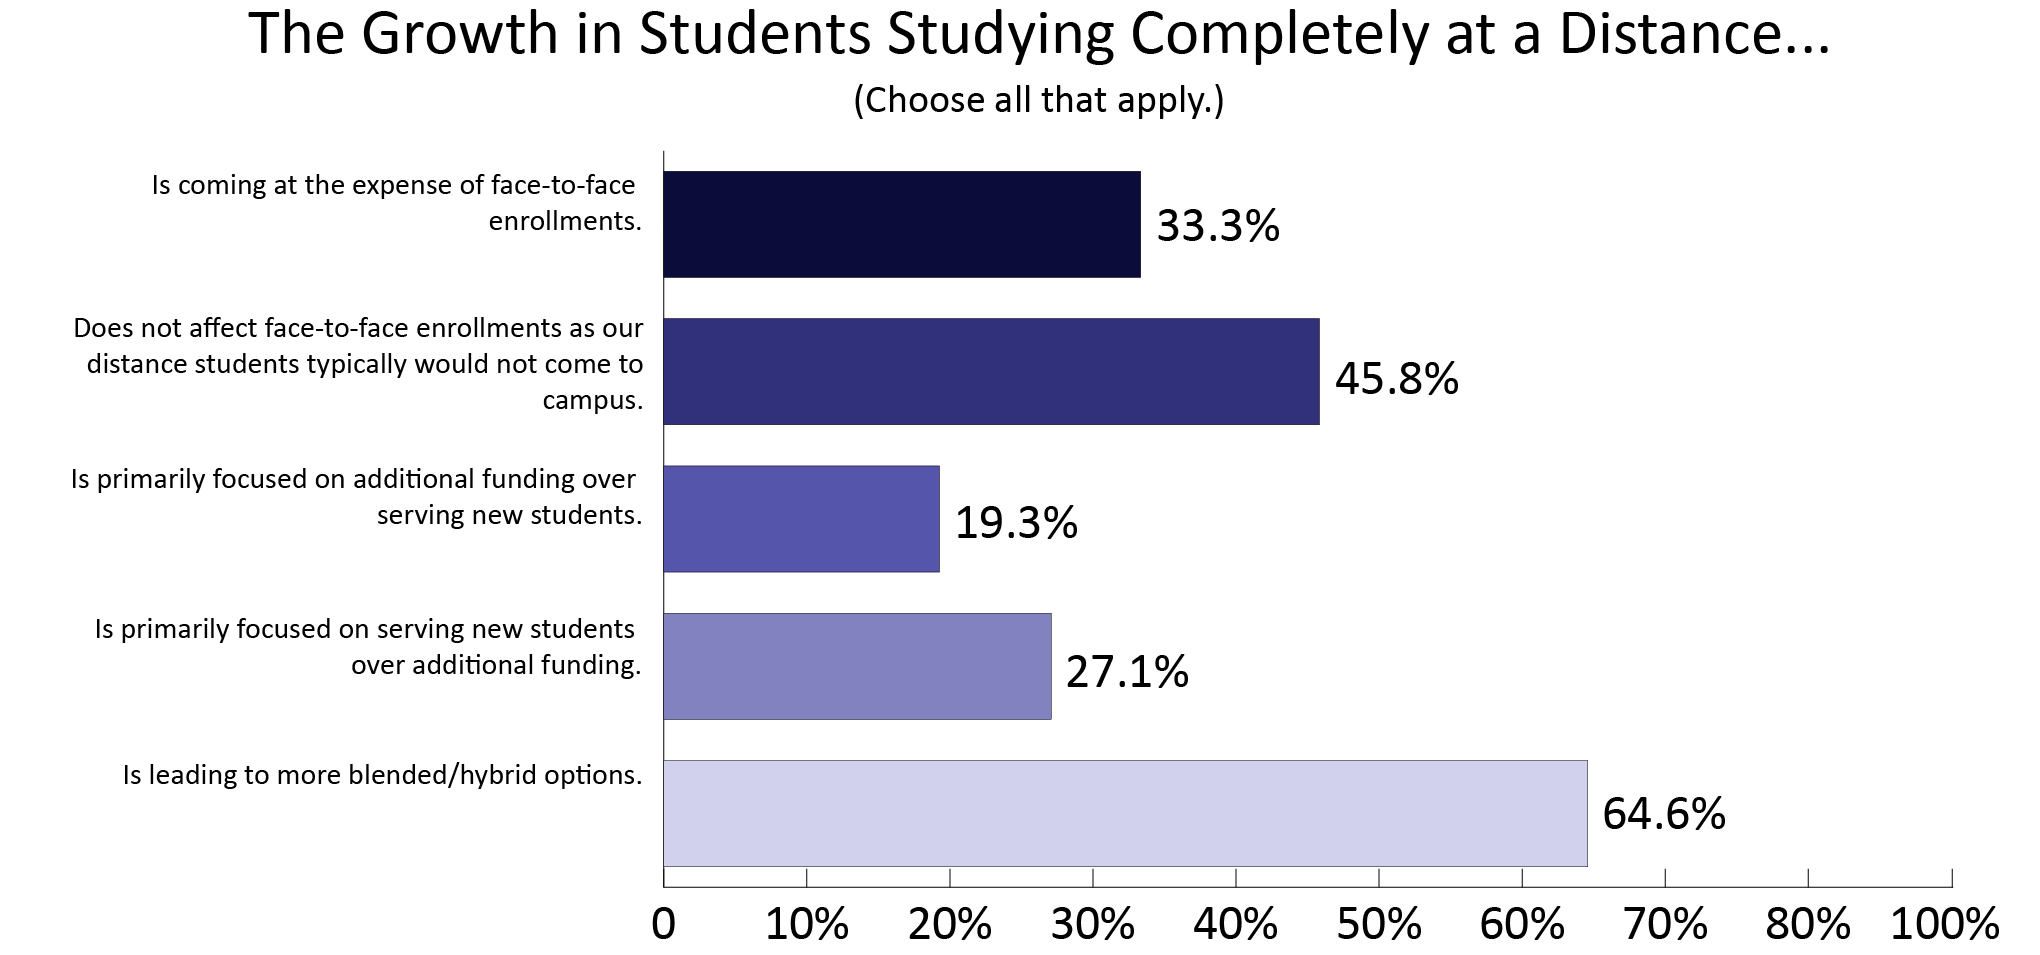 Graph of answers to question "growth in stduents studying completely at a distance." Expense of F2F enrollments (33.3%), does not affect F2F enrollments as distance students do not come to campus (45.8%), is primarily focused on + funding over serving new students (19.3%), is primarily focused on serving new students over + funding (27.1%), is leading to more blended/hybrid options (64.6%)